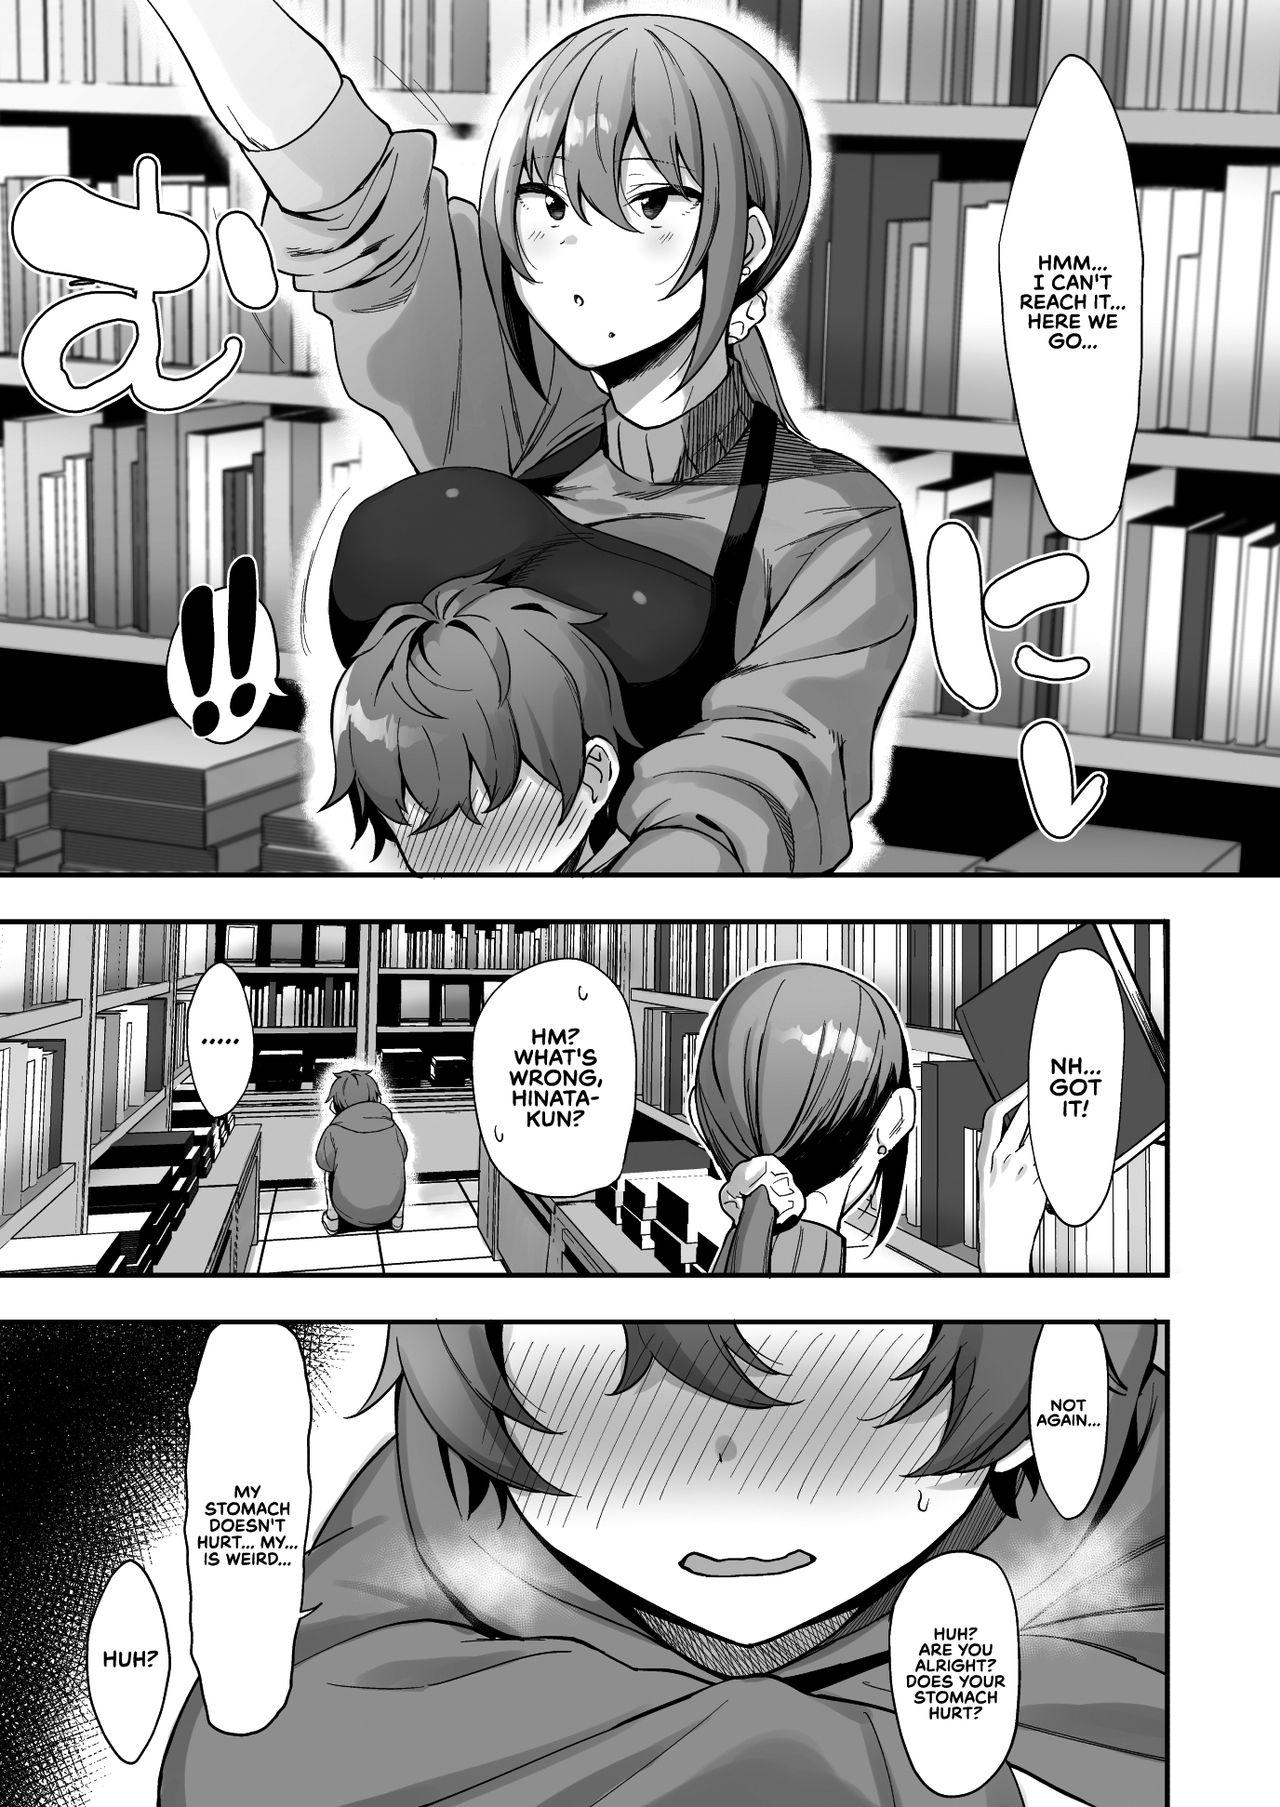 Cameltoe Furuhonya no Onee-san to | With The Lady From The Used Book Shop - Original Spank - Page 8